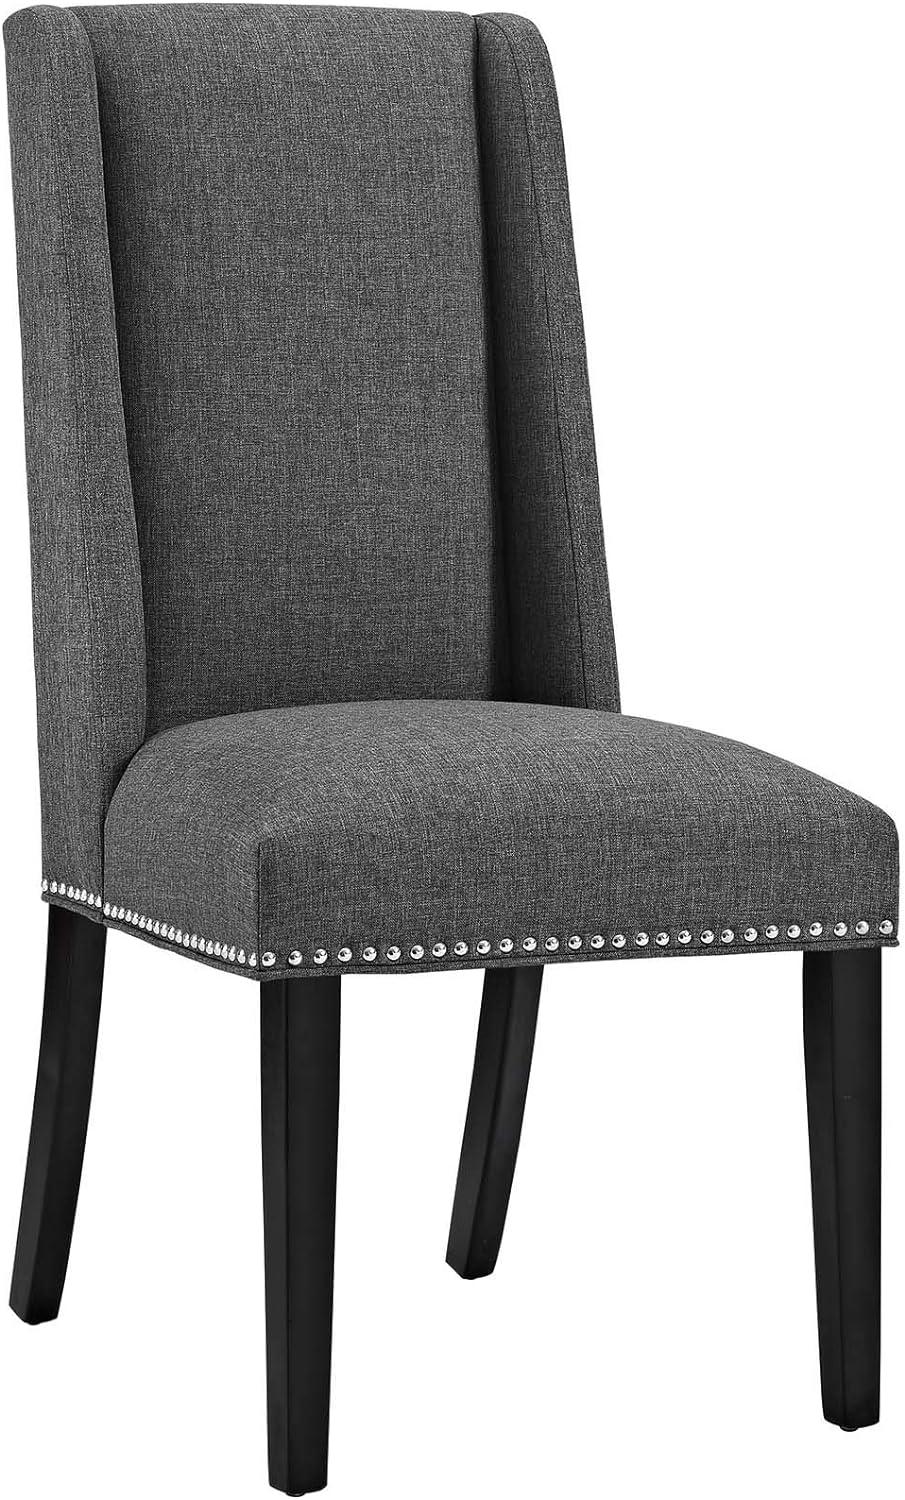 Elegant Gray Leather Upholstered Side Chair with Wooden Legs